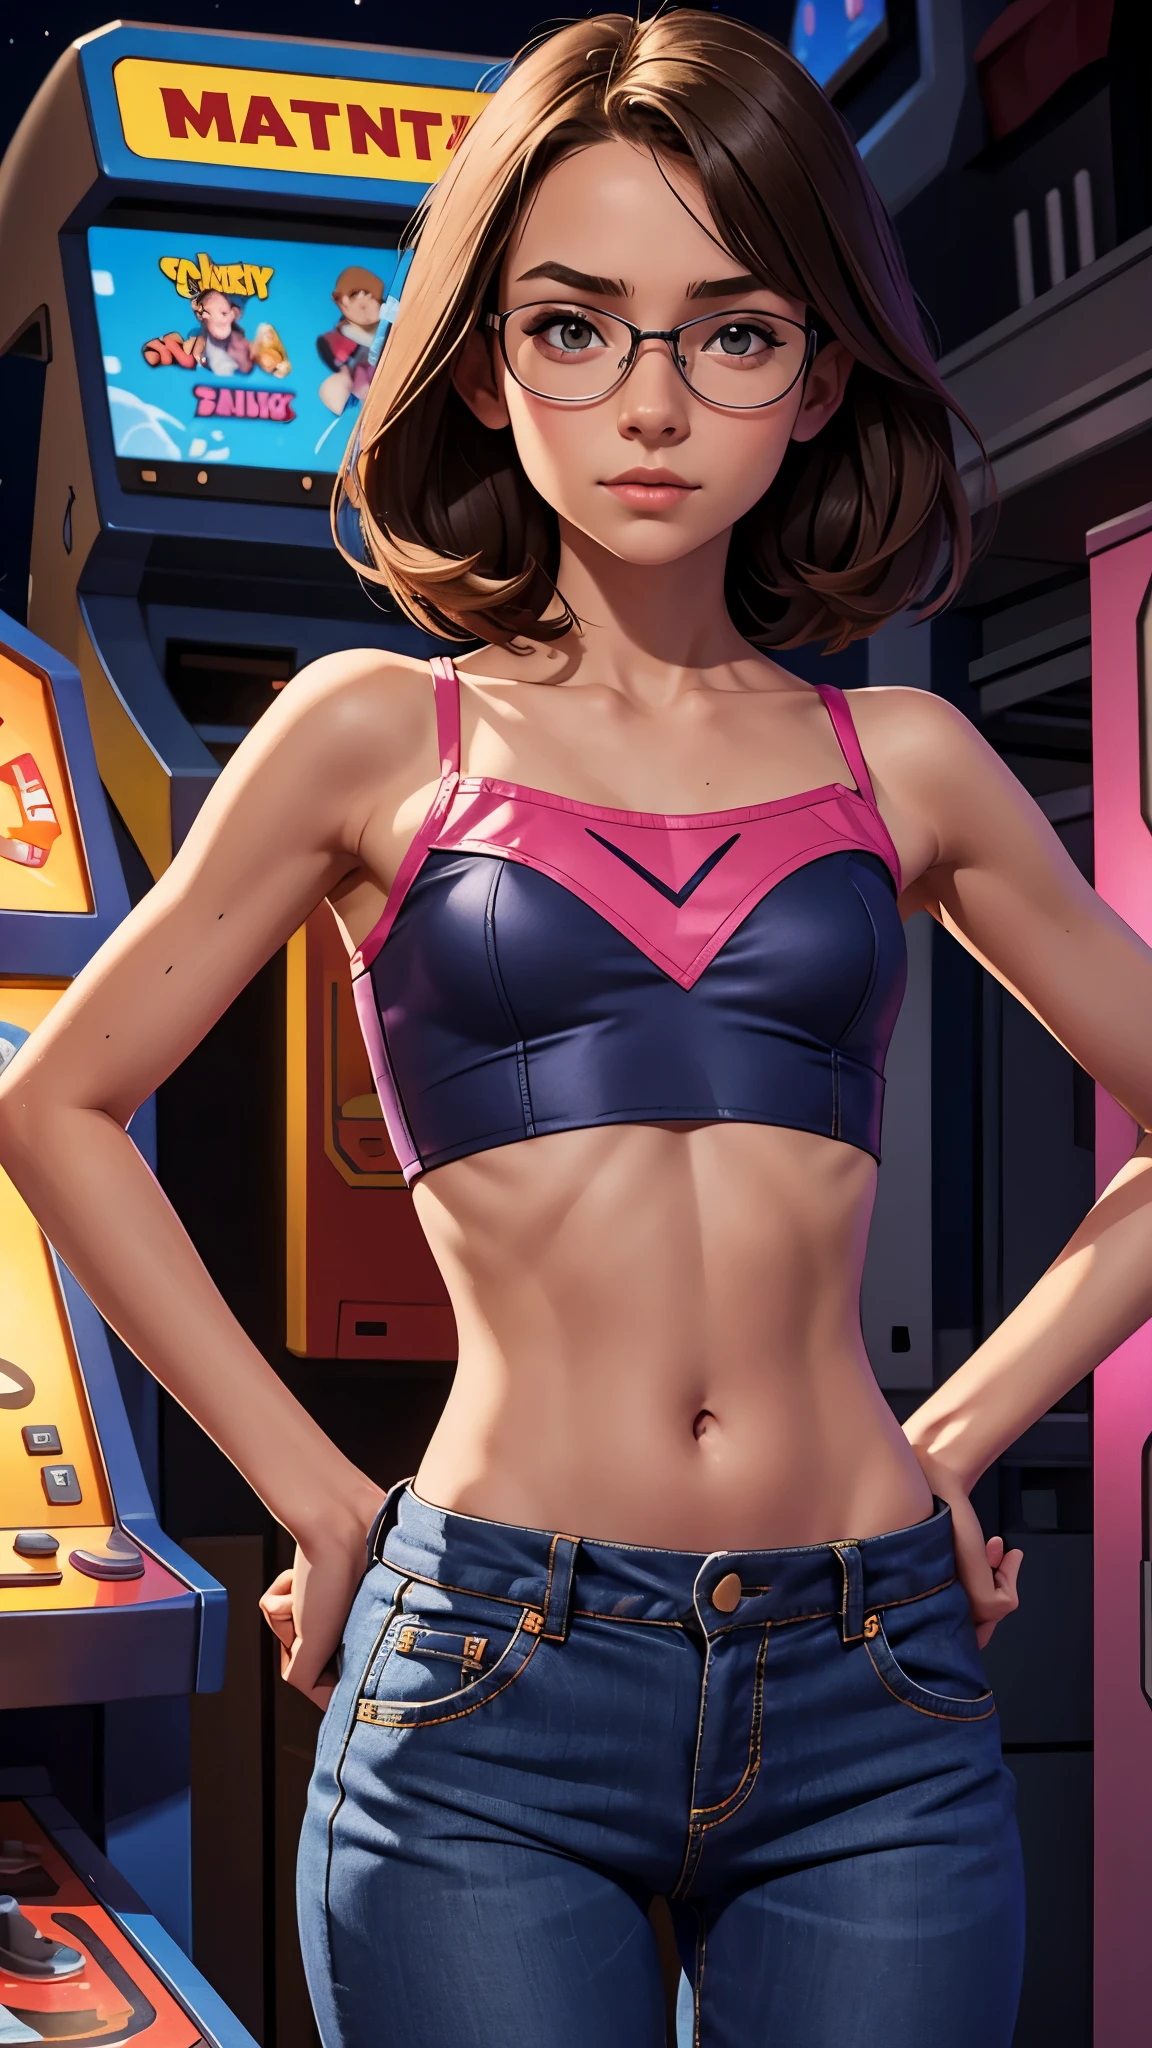 A skinny, flat chested, 13 year old girl, . Nerdy clothes, showing off midriff. Arcade setting. Night time.